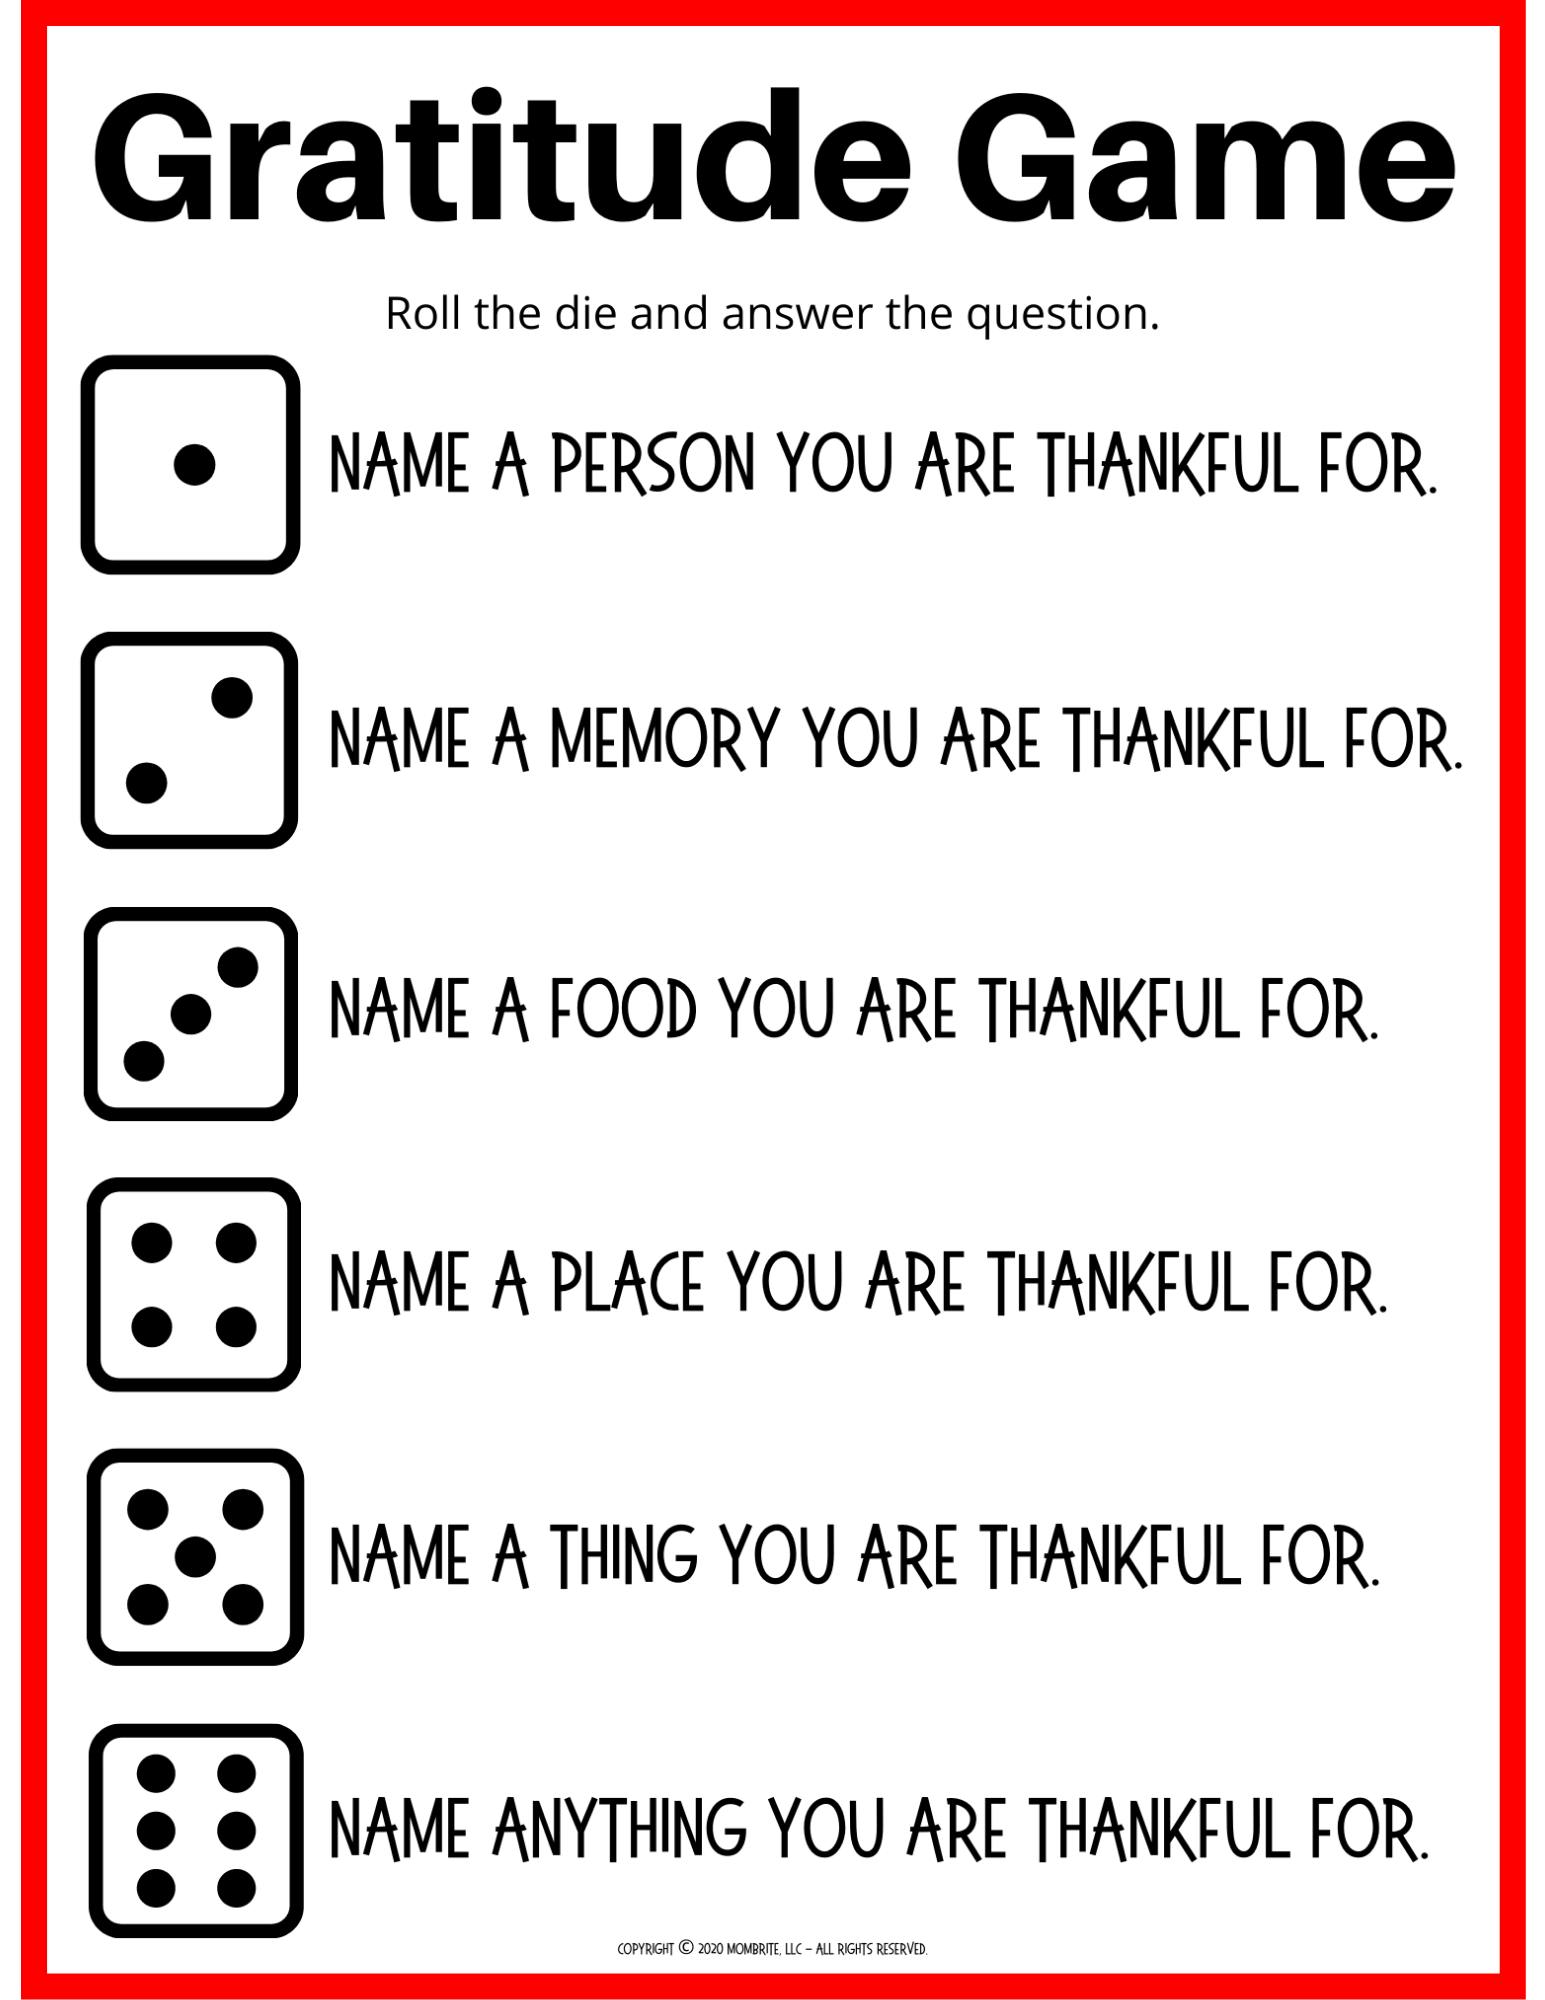 thanksgiving-is-such-a-fantastic-time-to-share-what-you-are-thankful-for-this-interactive